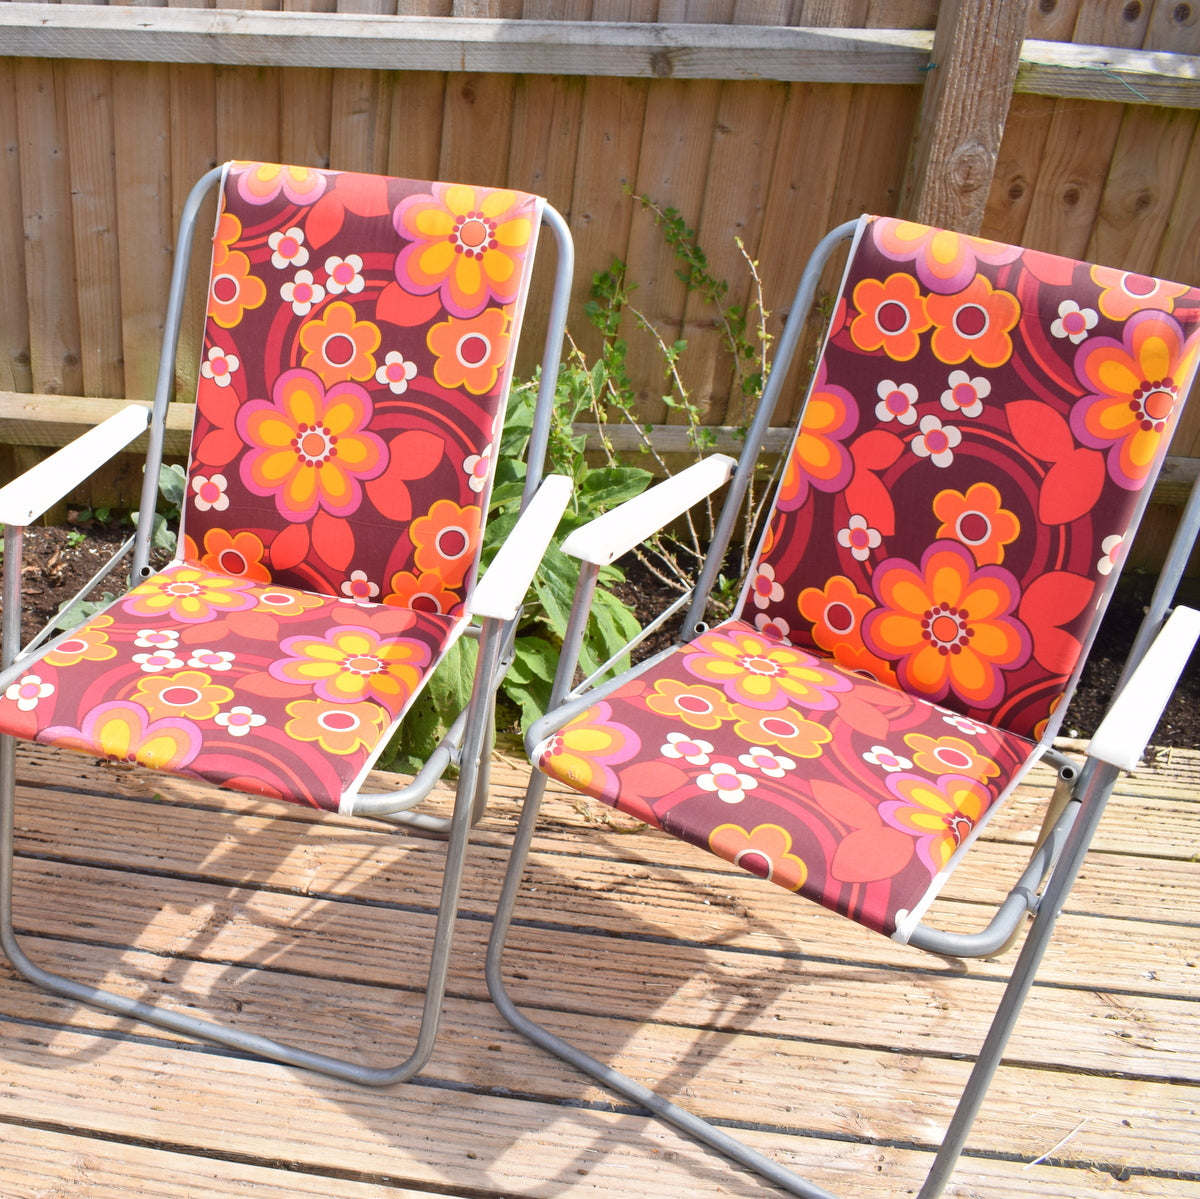 Vintage 1960s Folding, Padded Garden Chairs - Flower Power - Pink & Yellow